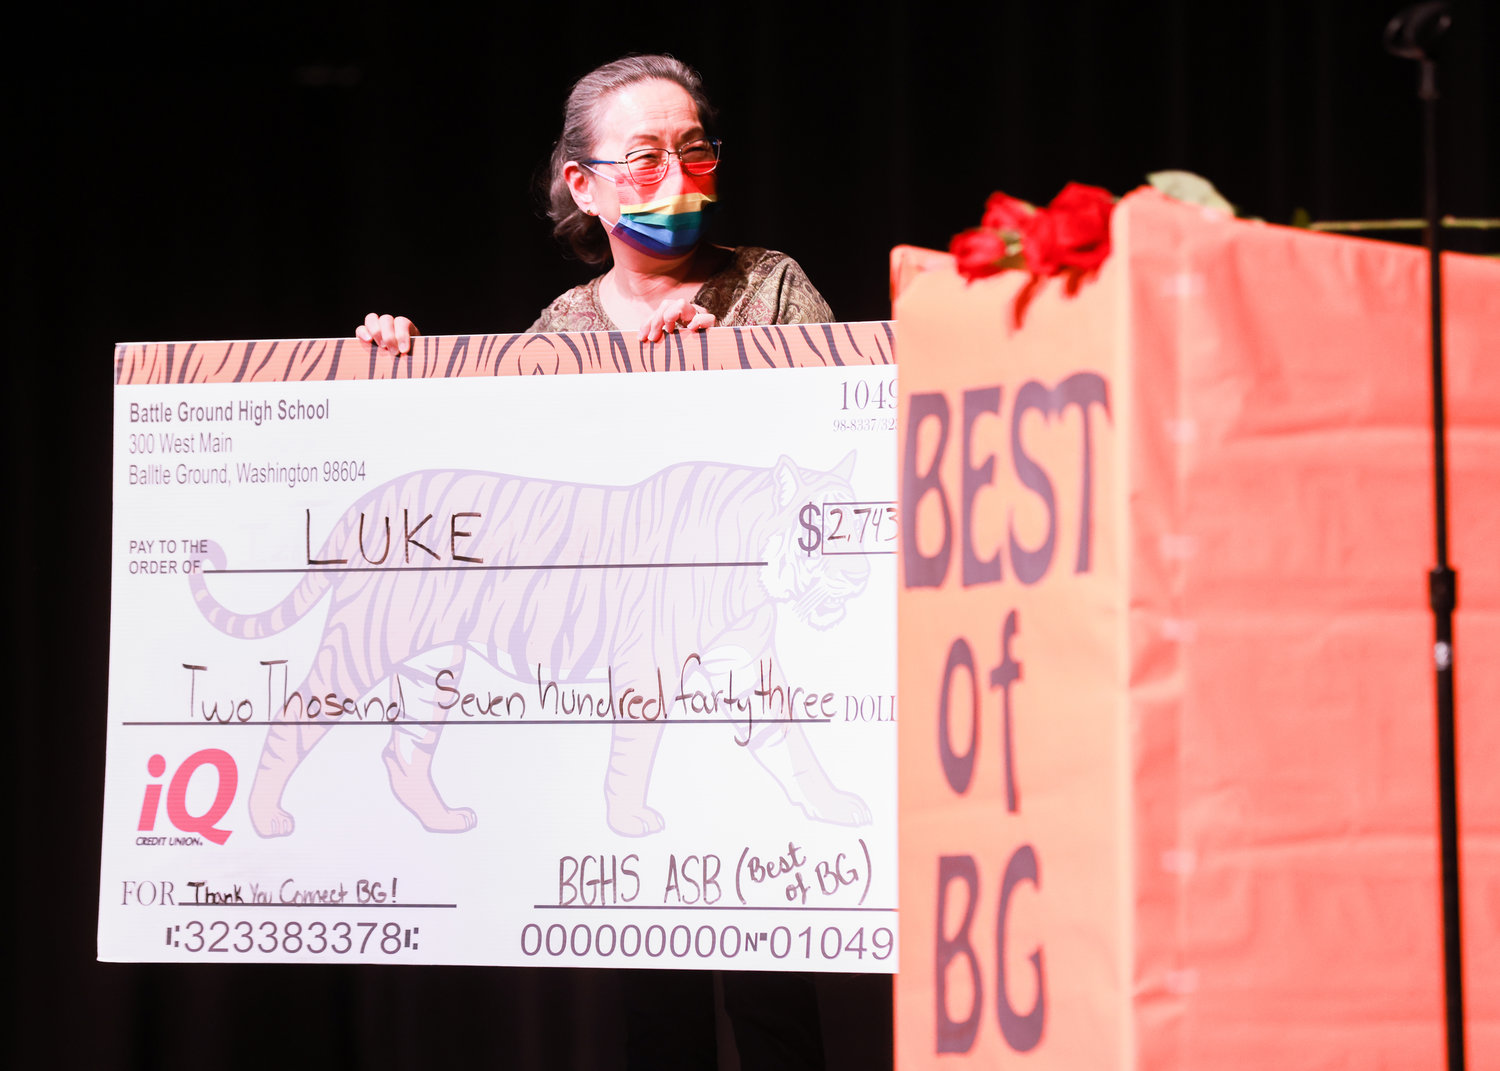 Over $2,700 was raised for Luke Montei, a teenager who has hypoplastic left heart syndrome, through seat sales and donations during the Best of BG charity pageant at Battle Ground High School on Saturday, March 25.